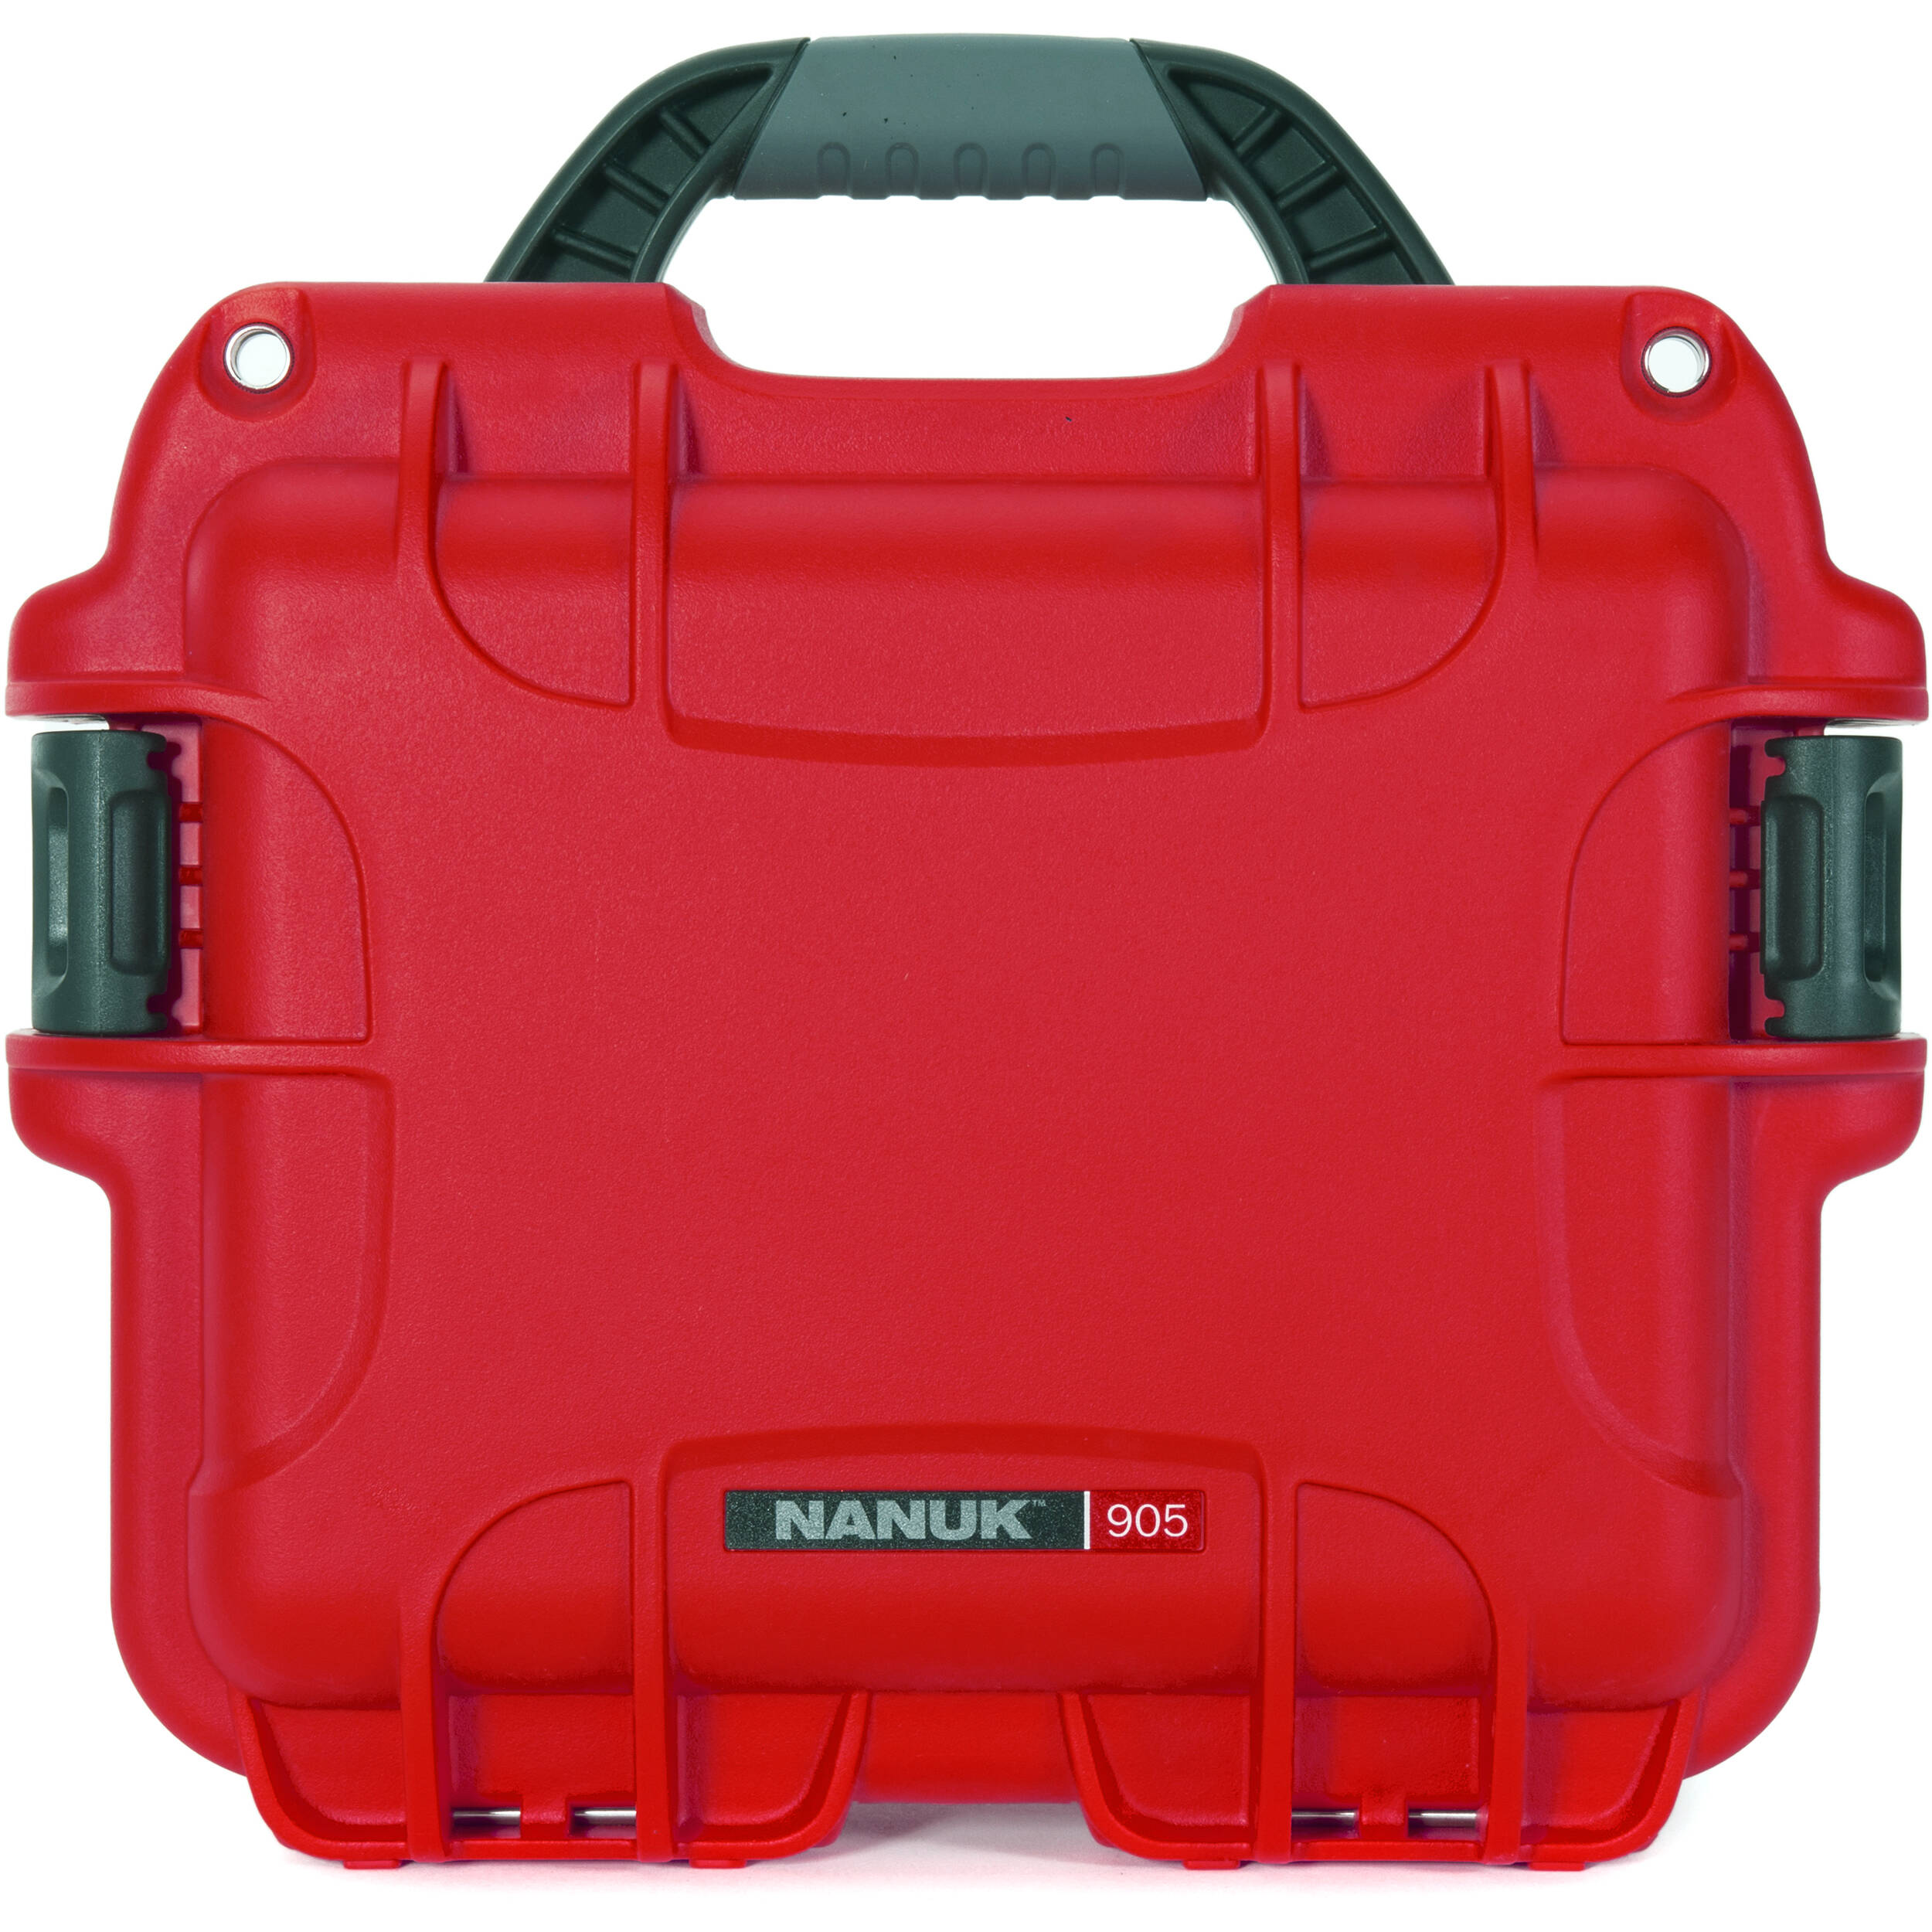 Nanuk 905 Waterproof Hard Case Pro Photo/Video Kit with Padded Dividers and Lid Organizer (Red)